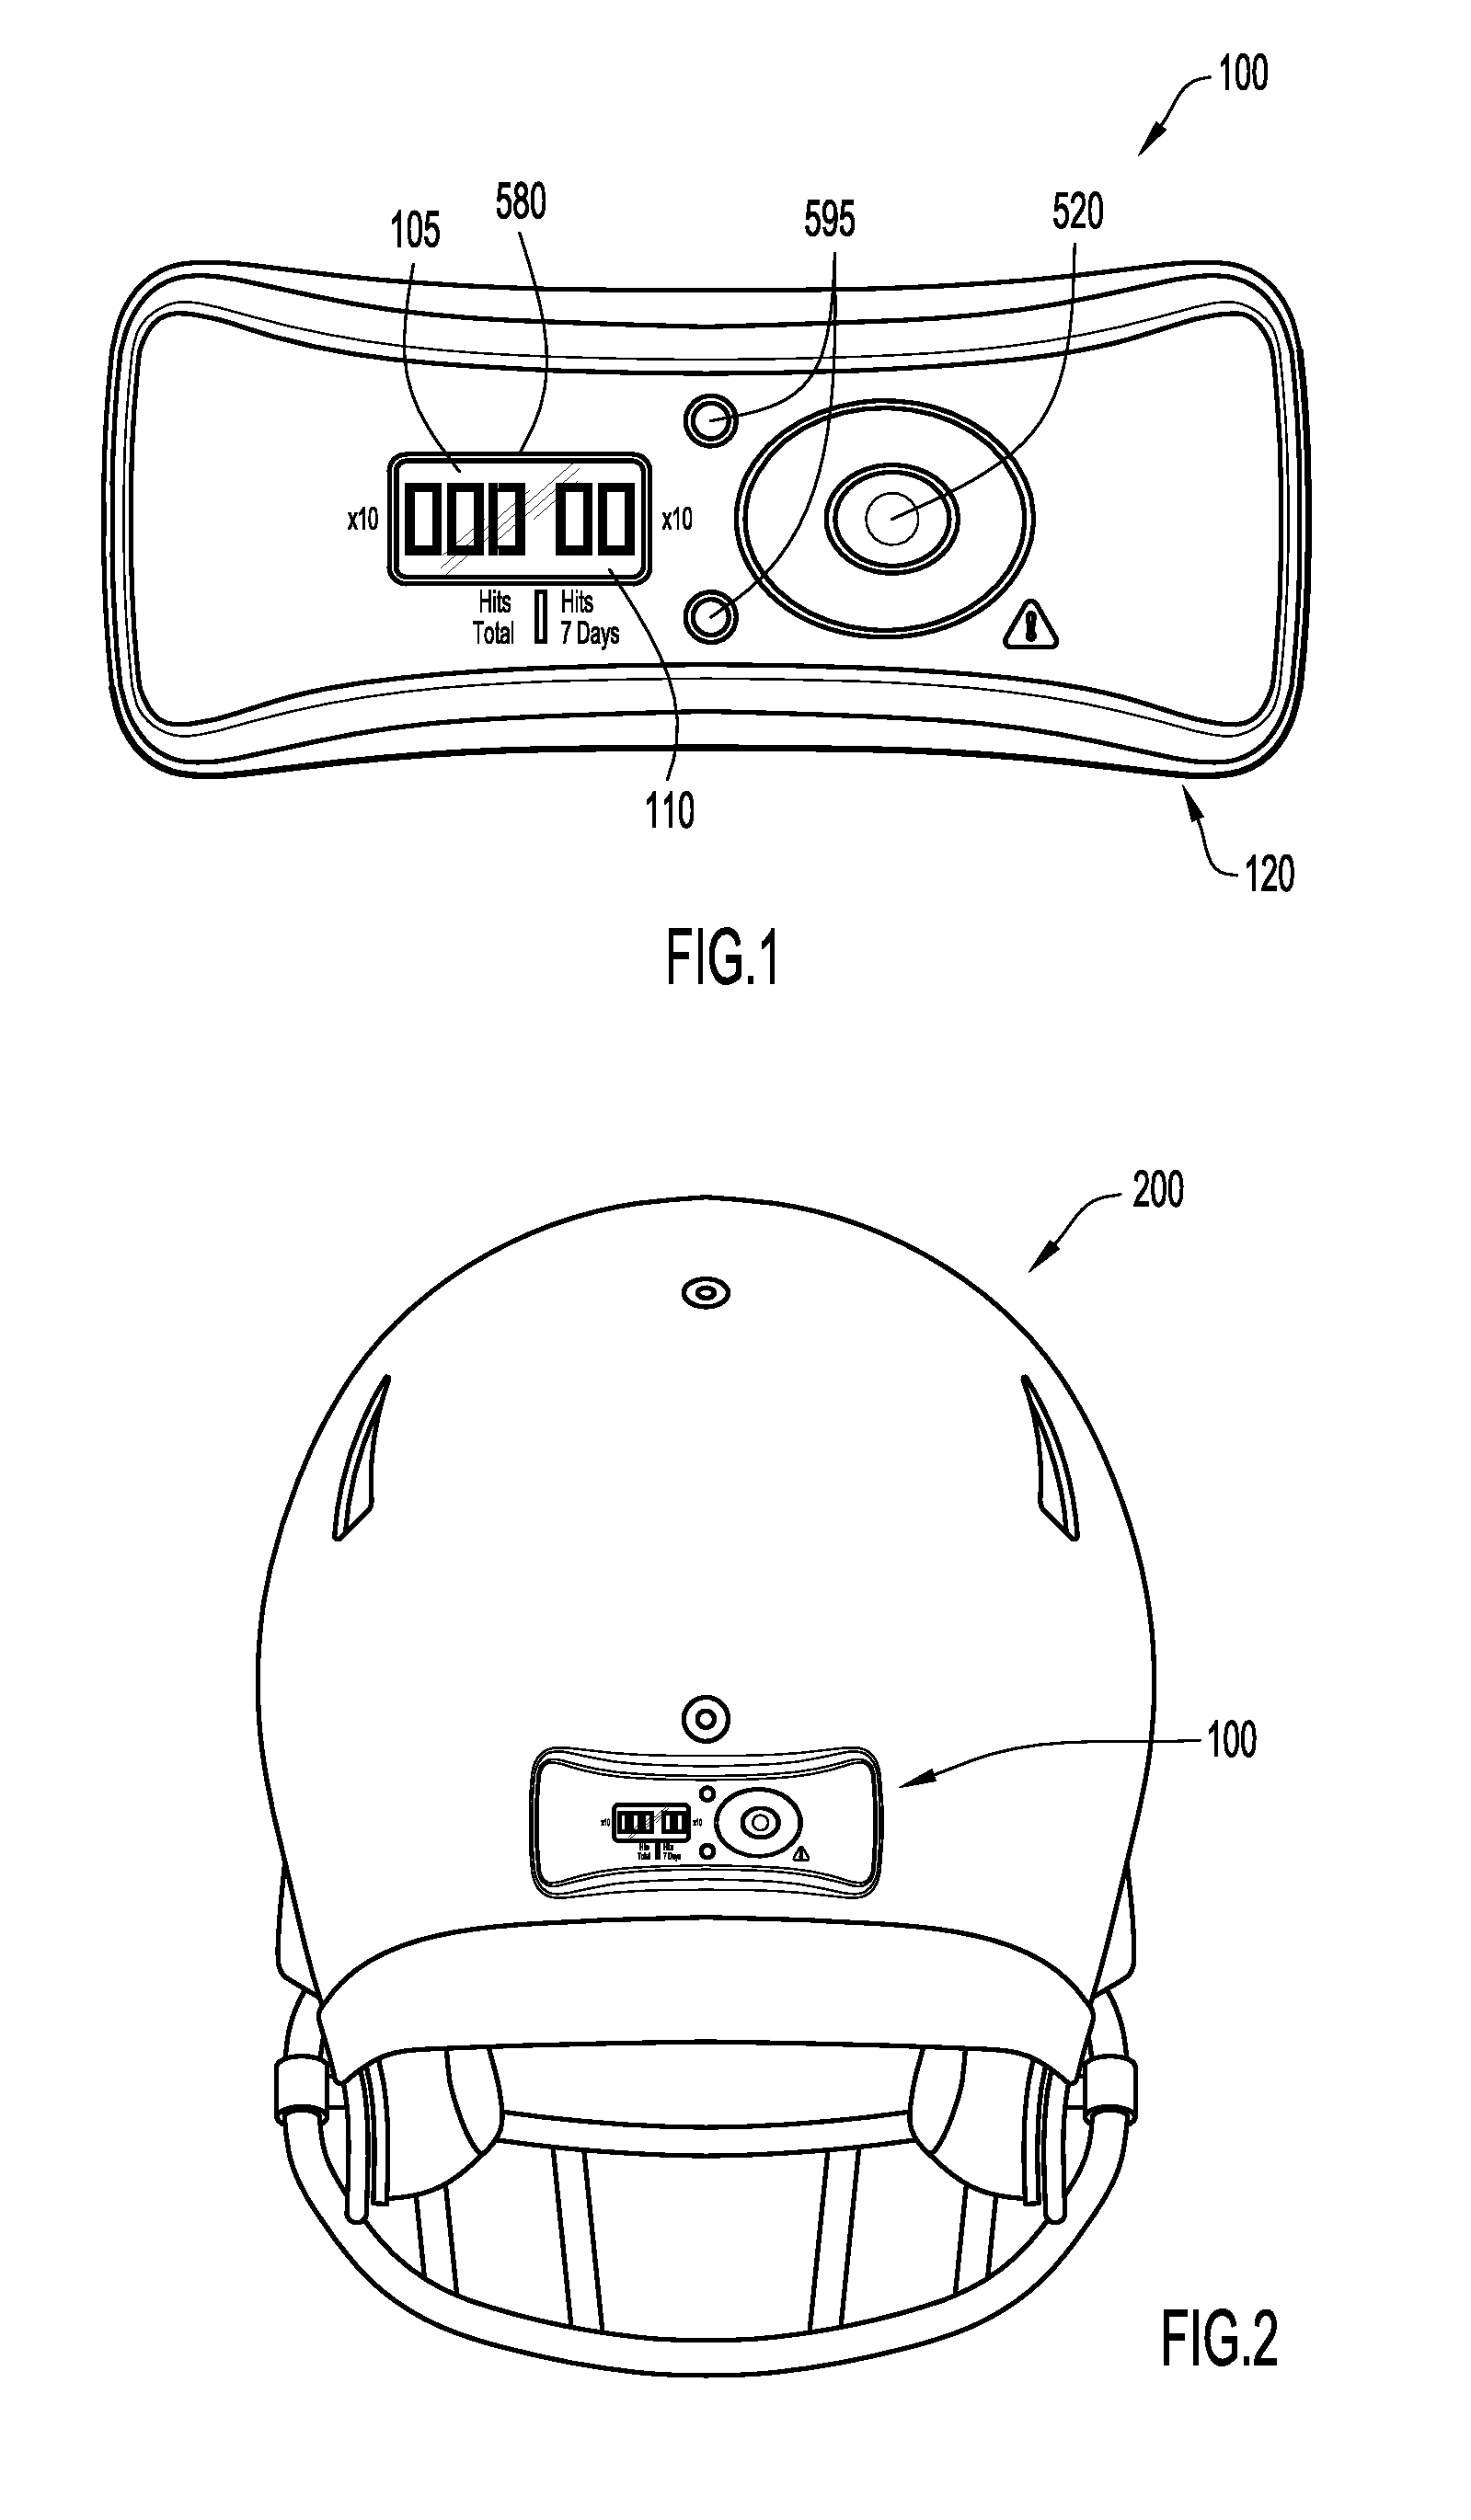 System and method for measuring bodily impact events